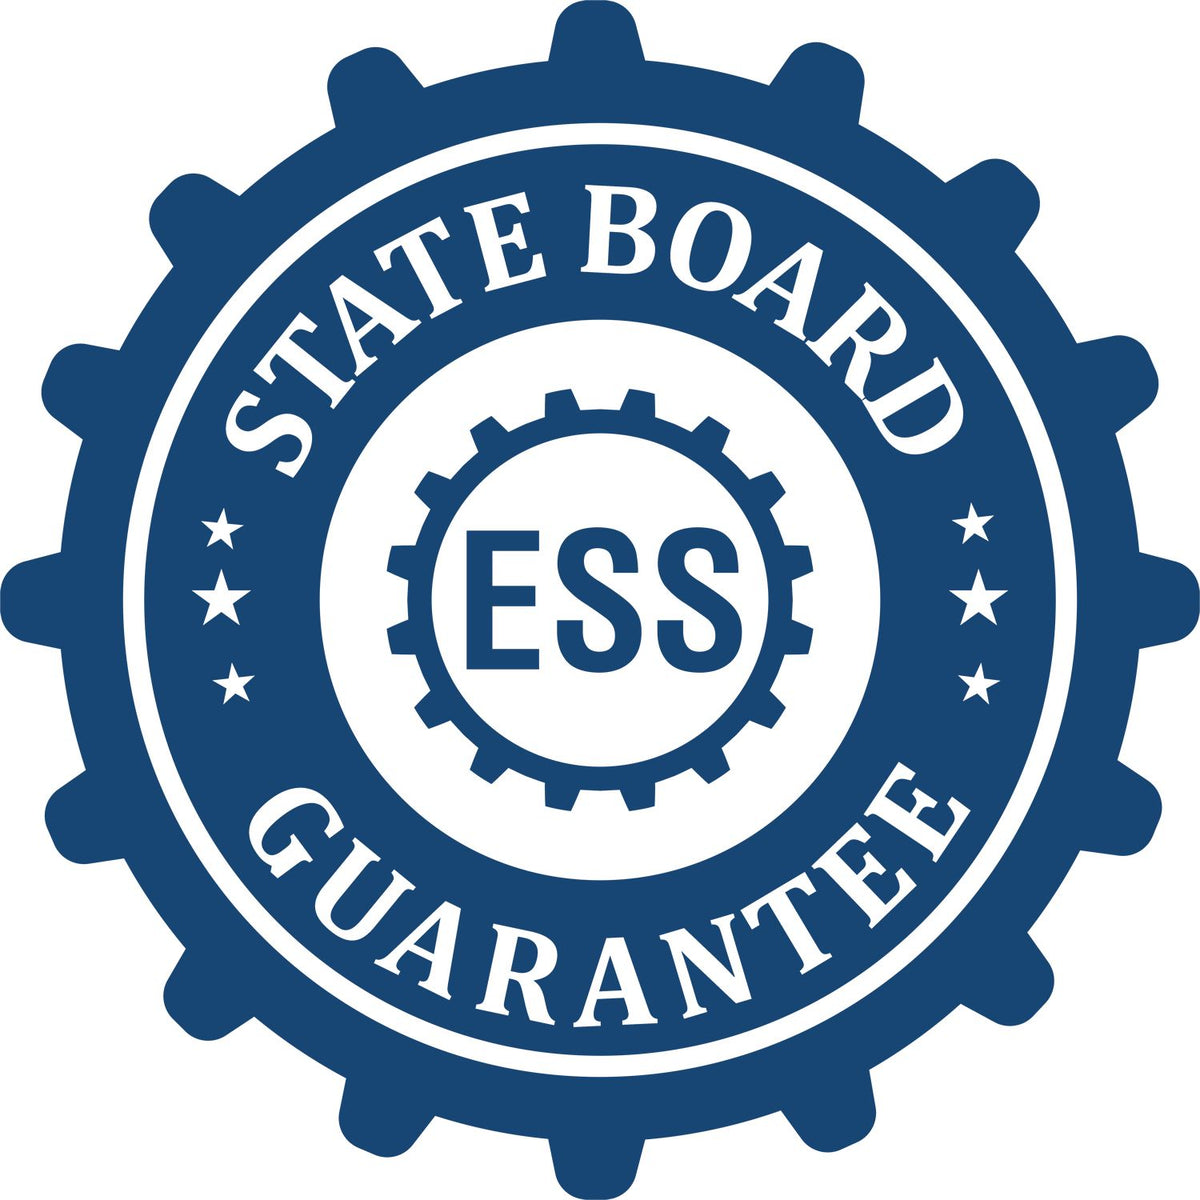 An emblem in a gear shape illustrating a state board guarantee for the Hybrid North Dakota Landscape Architect Seal